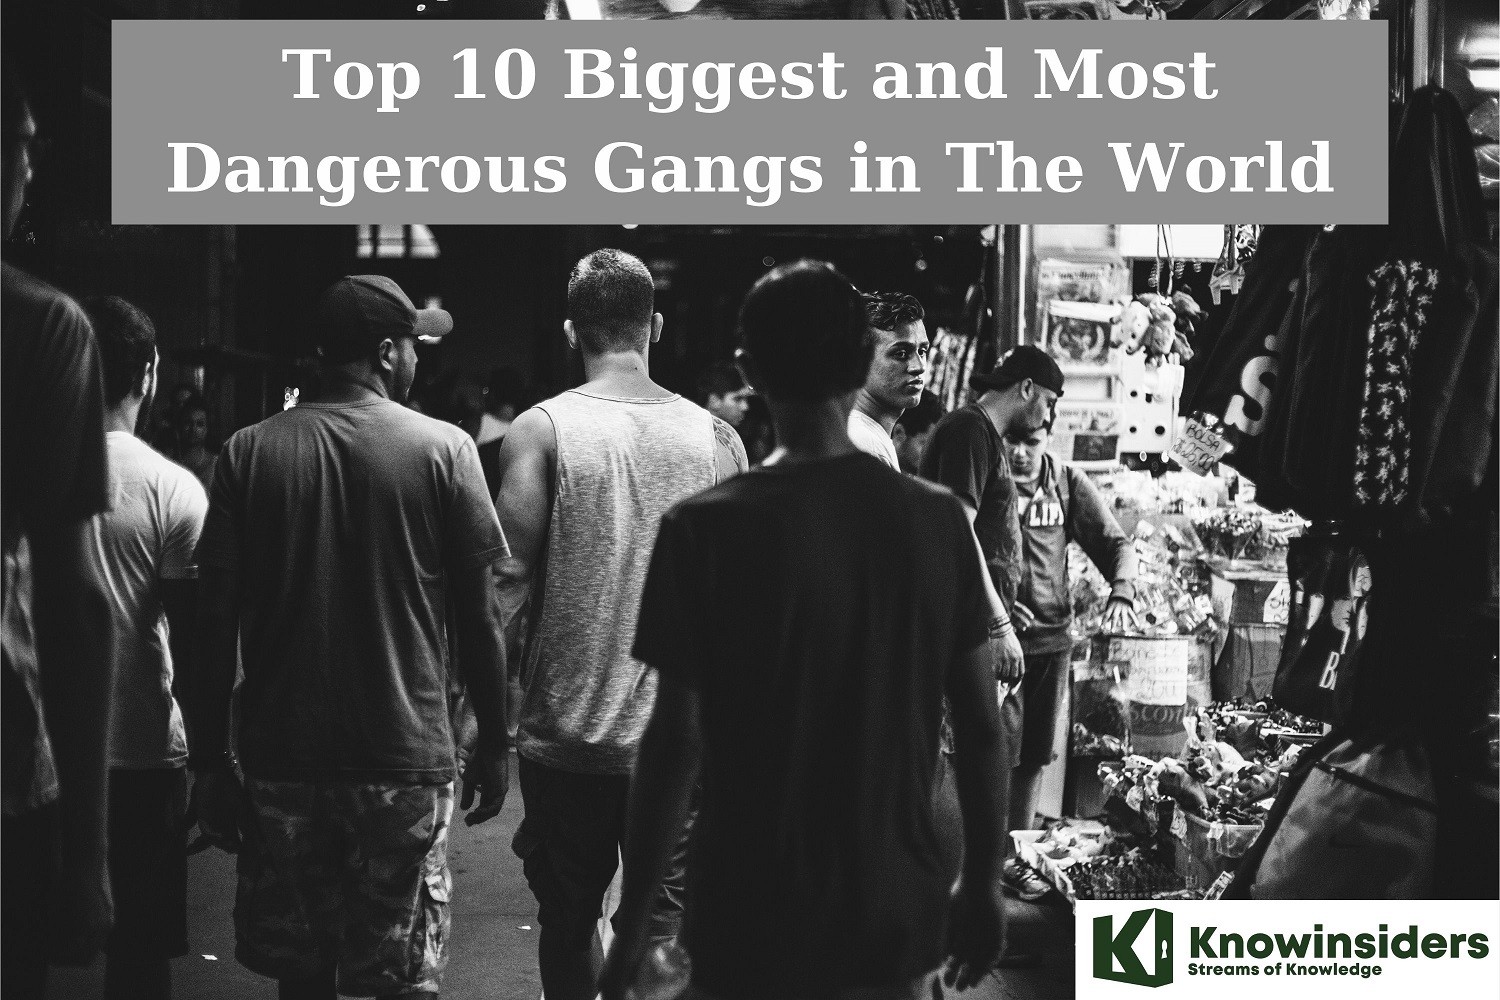 Top 10 Biggest and Most Dangerous Gangs in The World